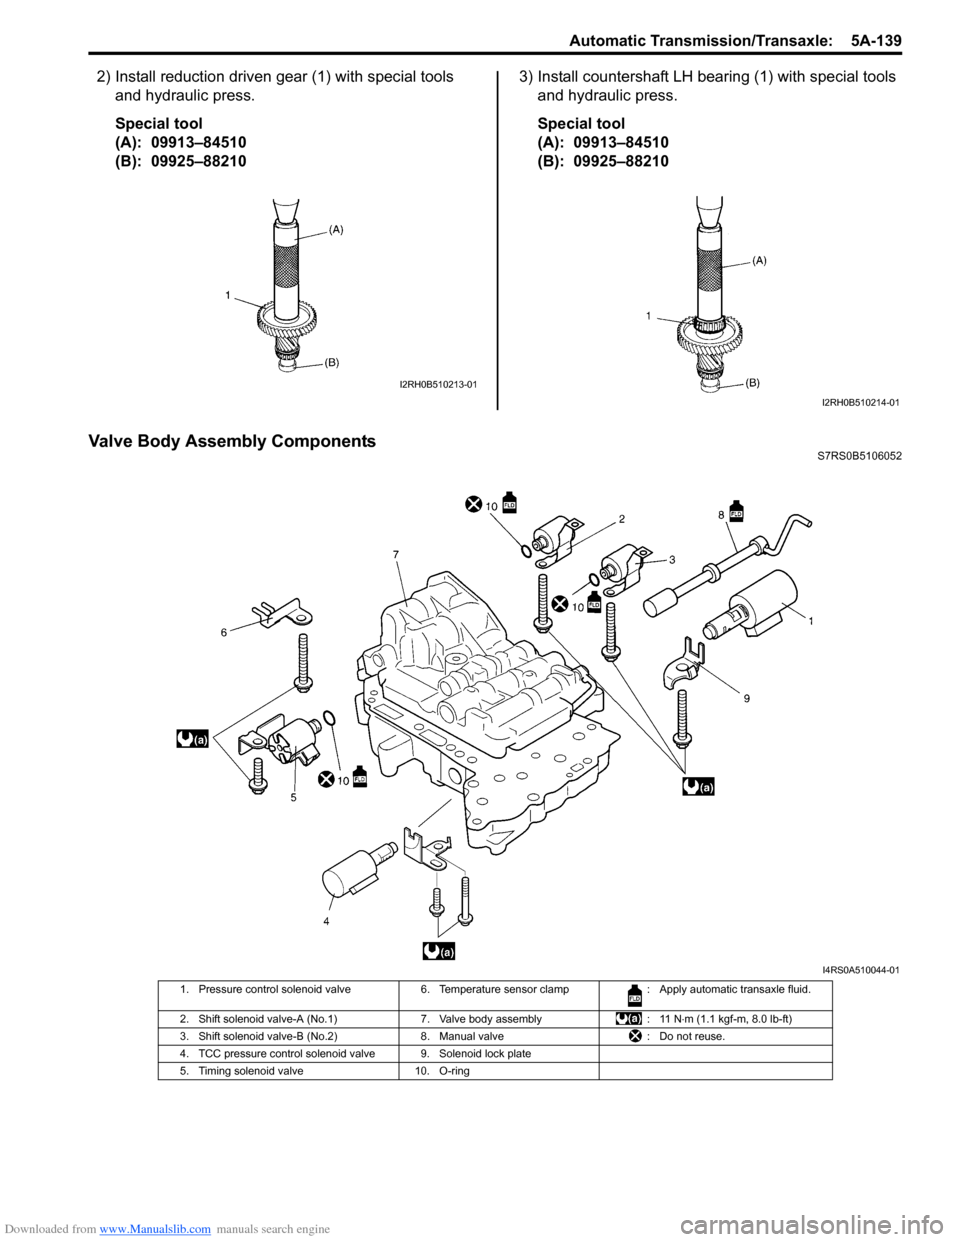 SUZUKI SWIFT 2007 2.G Service Manual PDF Downloaded from www.Manualslib.com manuals search engine Automatic Transmission/Transaxle:  5A-139
2) Install reduction driven gear (1) with special tools and hydraulic press.
Special tool
(A):  09913